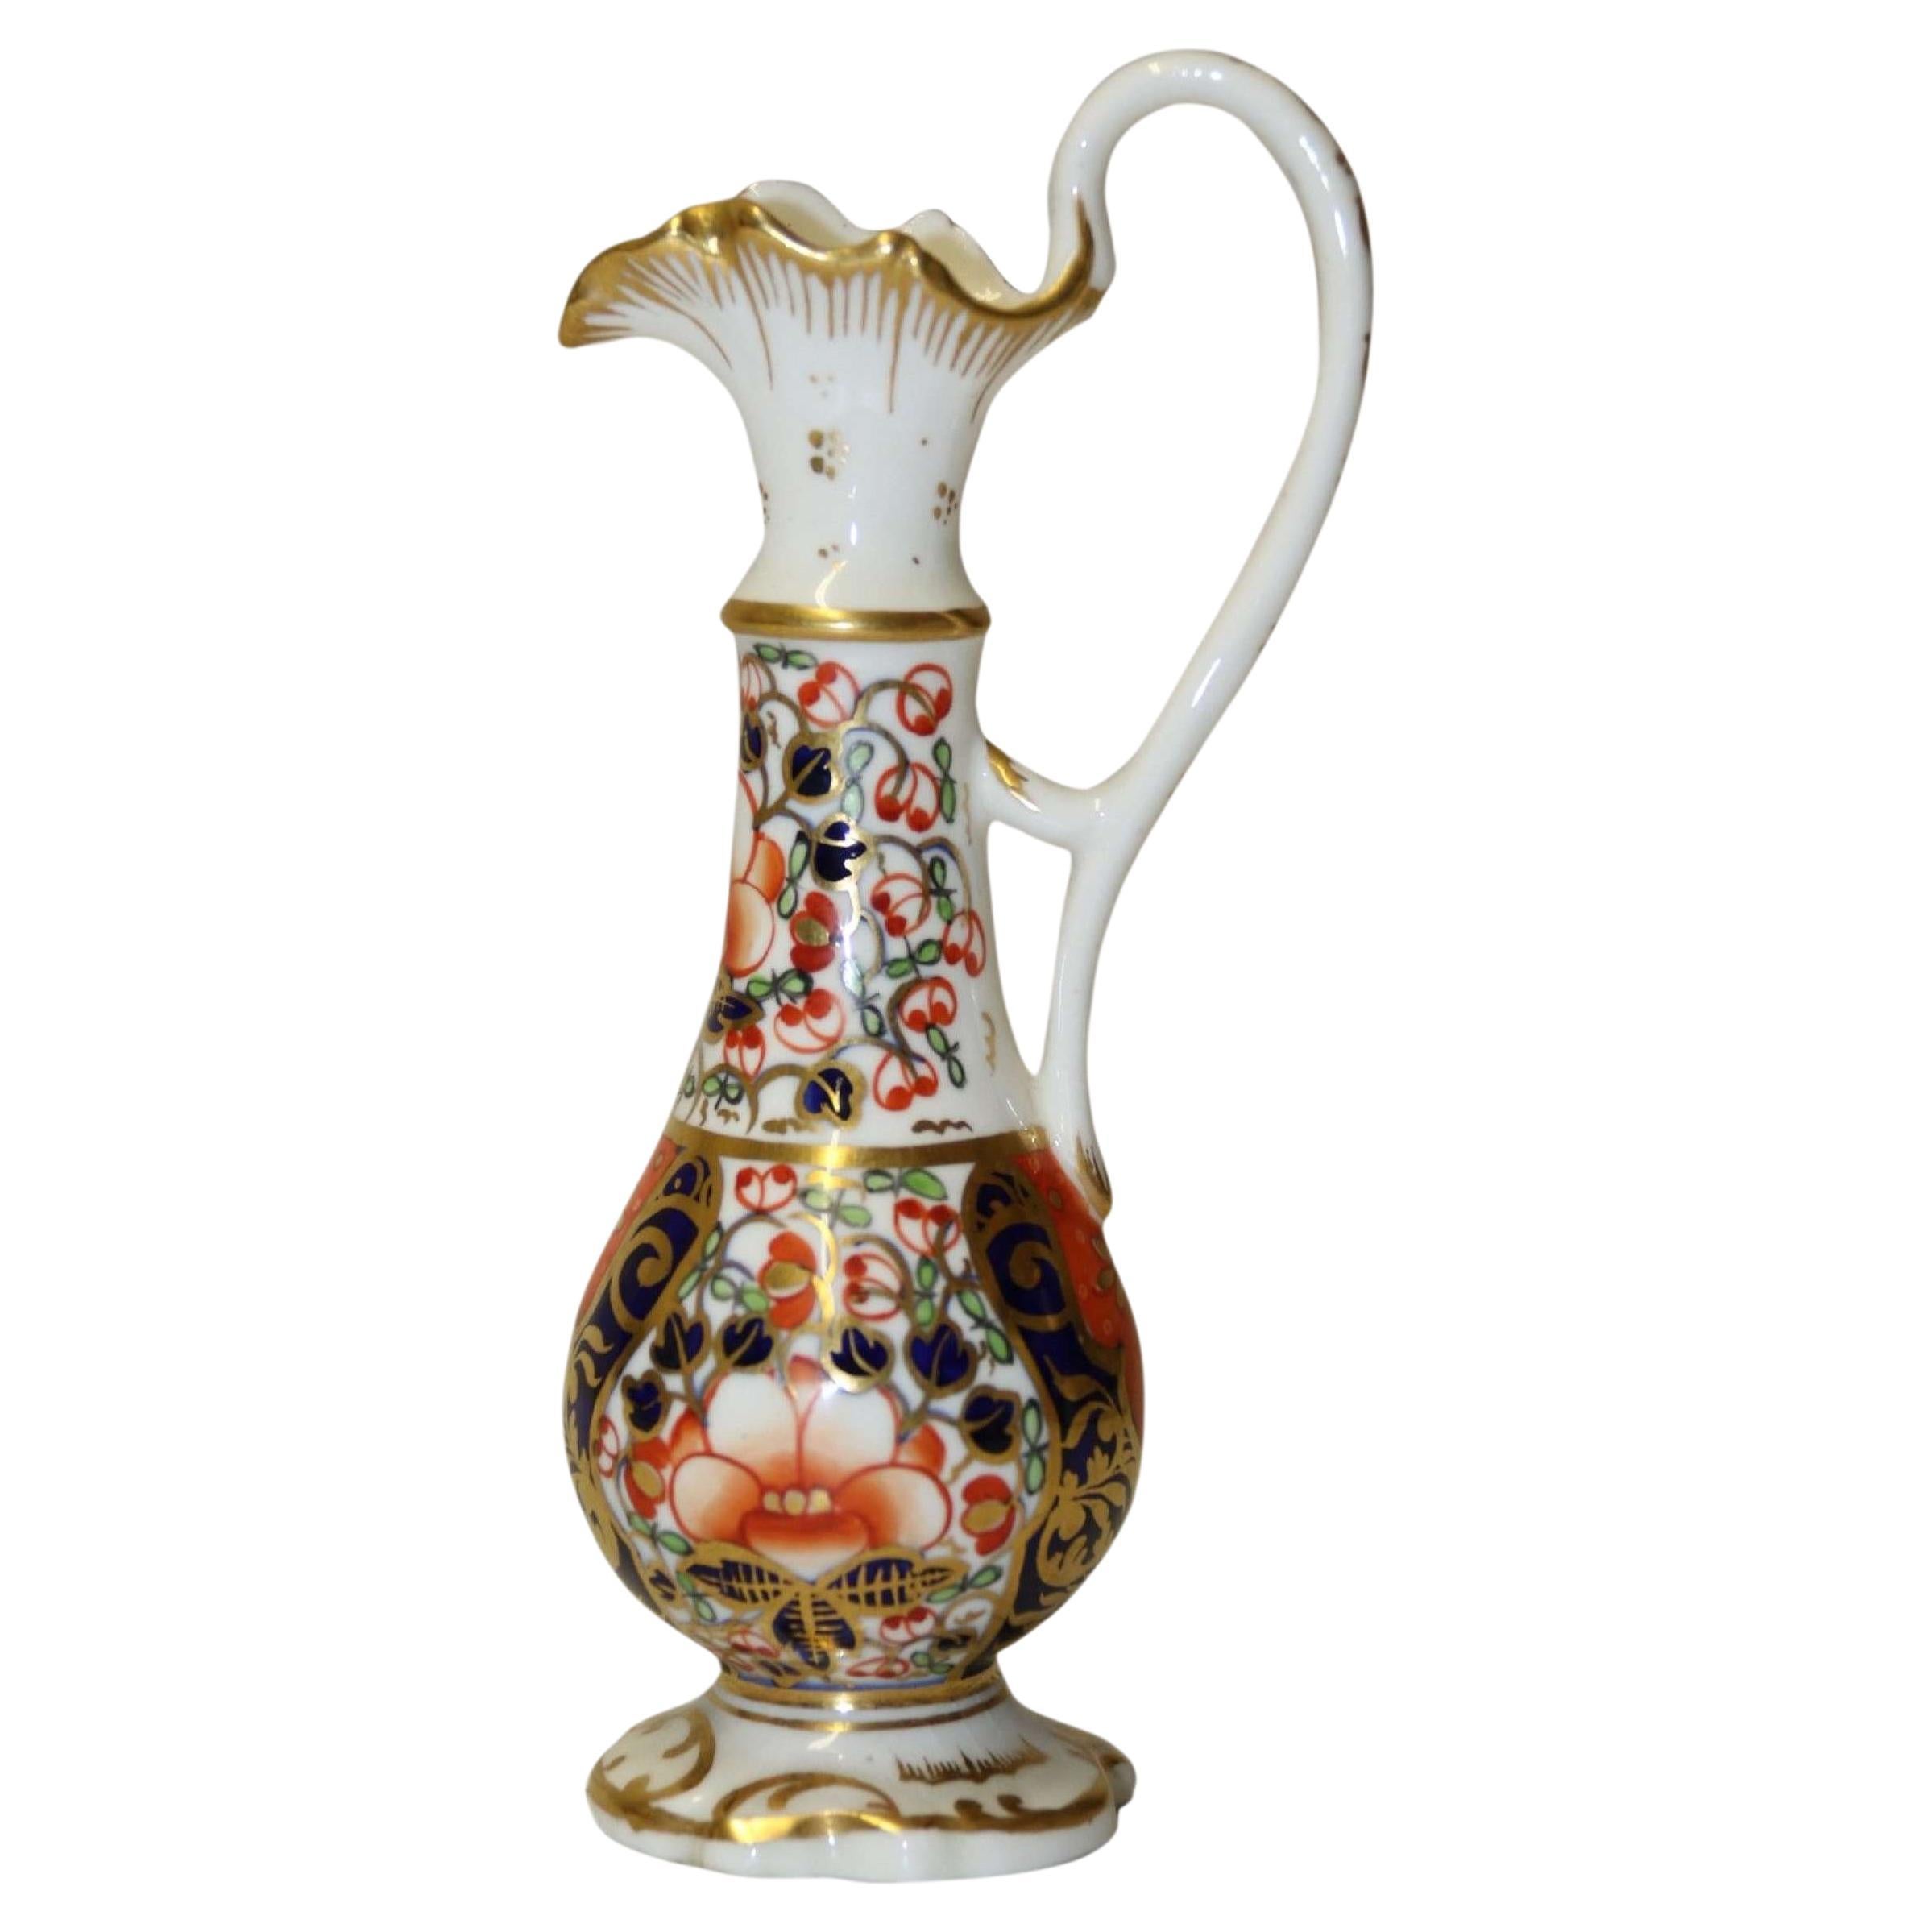 An antique English mid 19th century porcelain hand painted Derby ewer circa 1860 For Sale